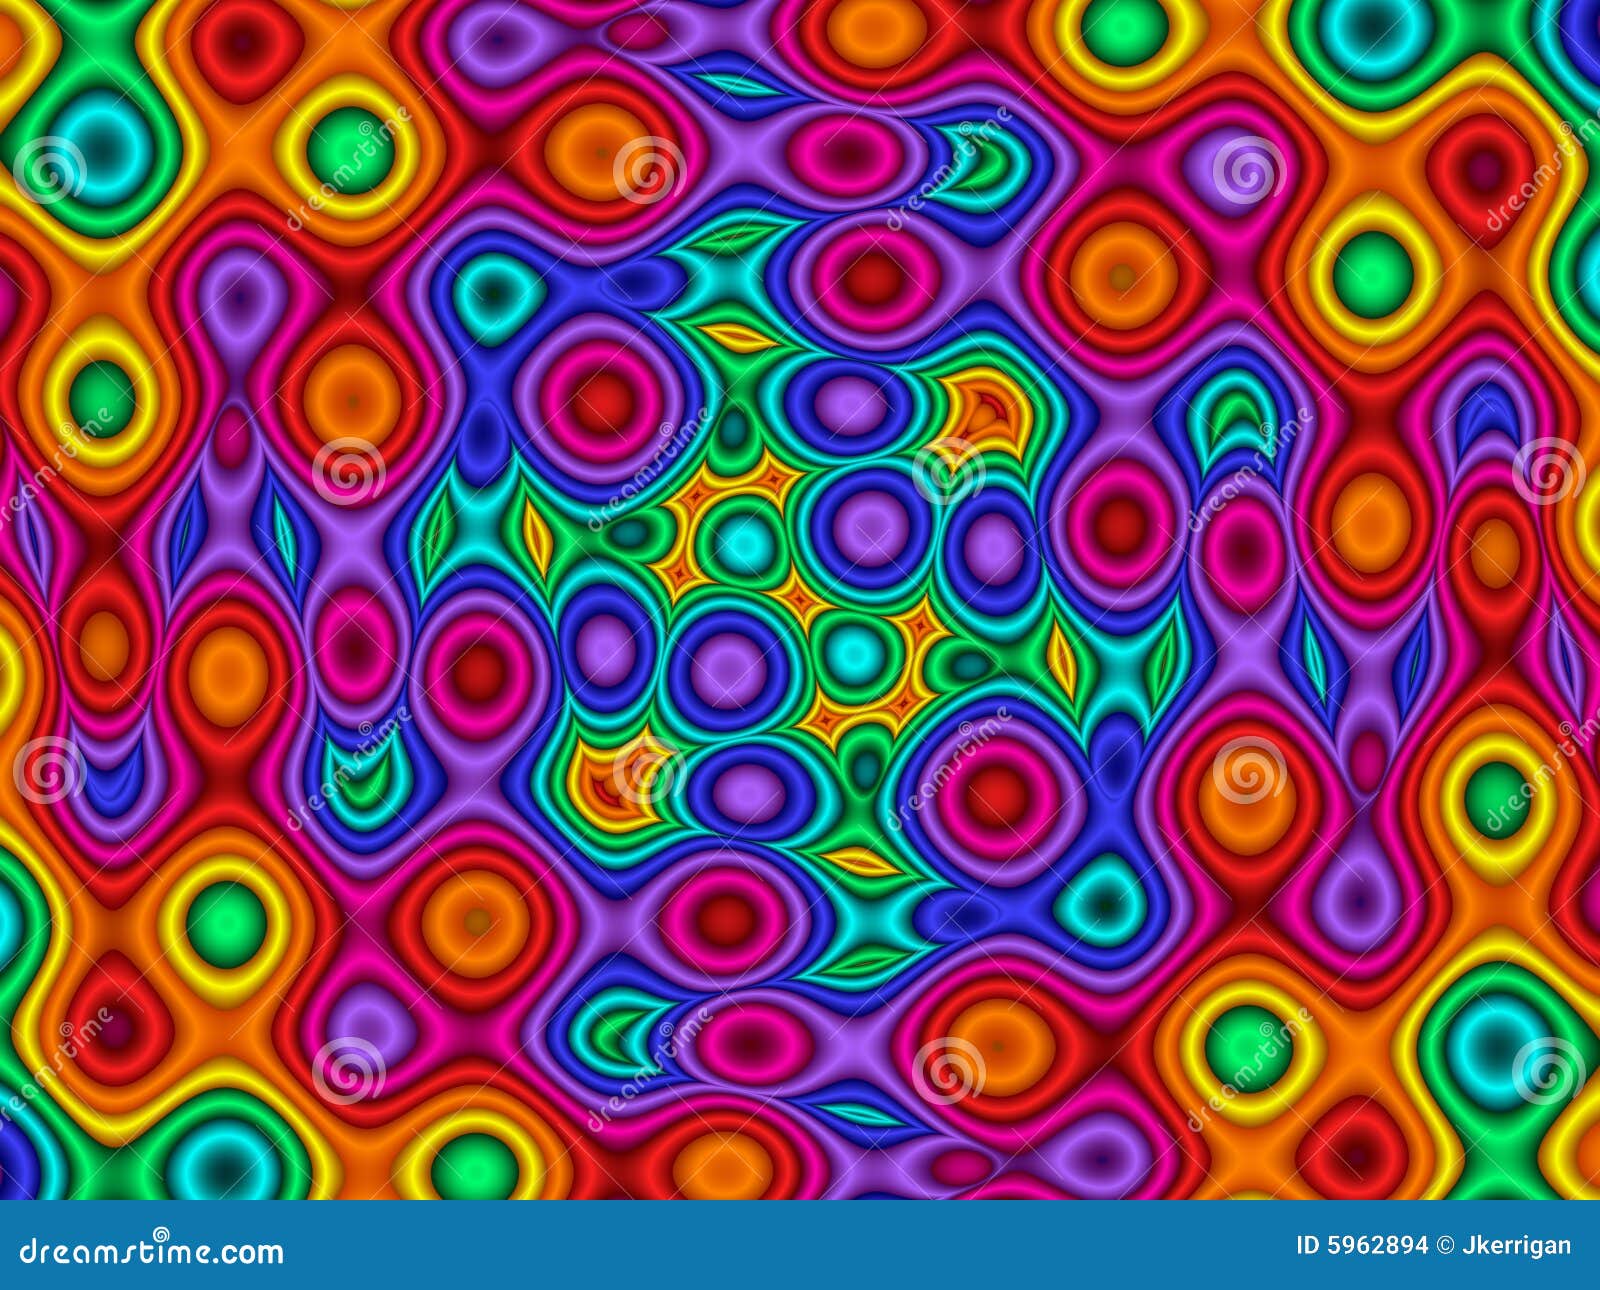 Groovy Rainbow Background Stock Images Image 5962894 HD Wallpapers Download Free Map Images Wallpaper [wallpaper376.blogspot.com]